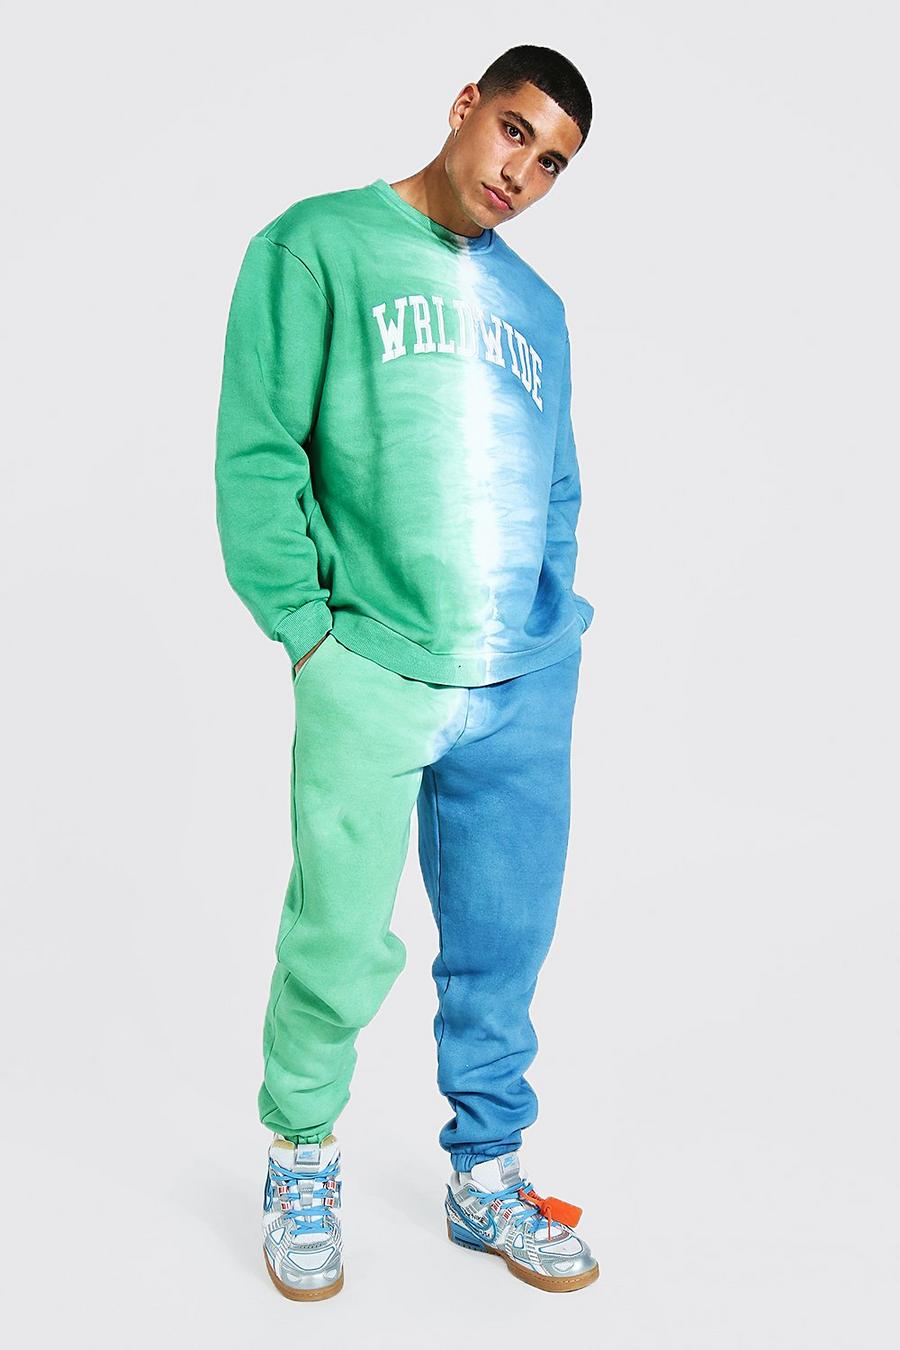 Green Oversized Wrldwide Ombre Sweater Tracksuit image number 1